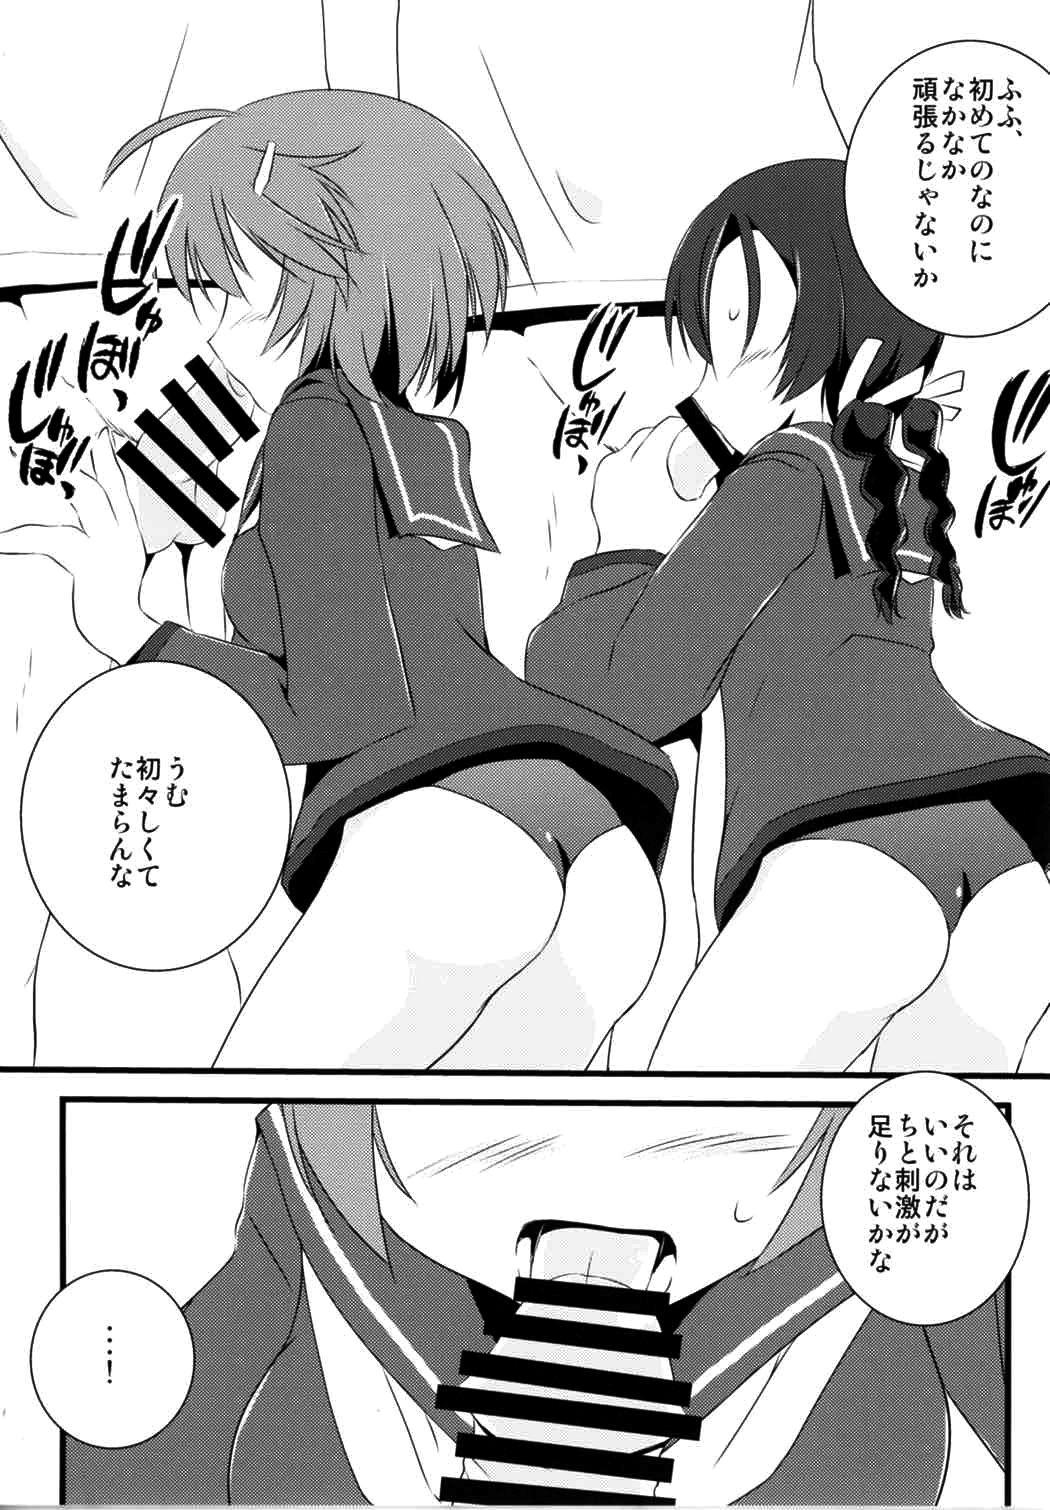 Buttfucking 502 Bad Gateway - Brave witches Reverse - Page 9